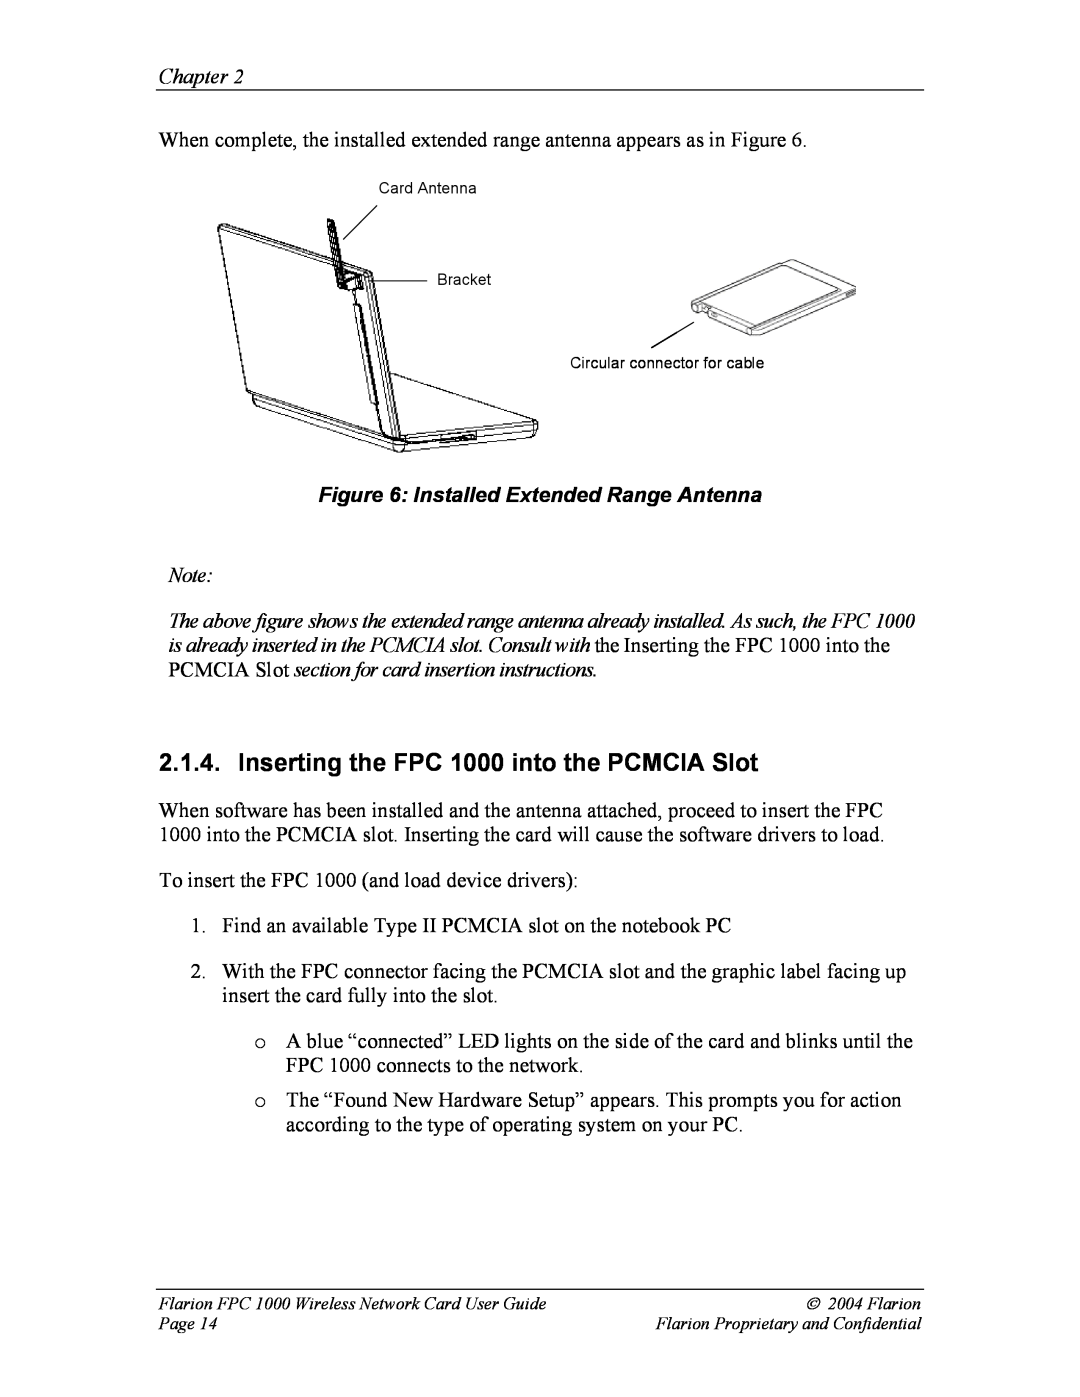 GE manual Inserting the FPC 1000 into the PCMCIA Slot, Installed Extended Range Antenna, Chapter 